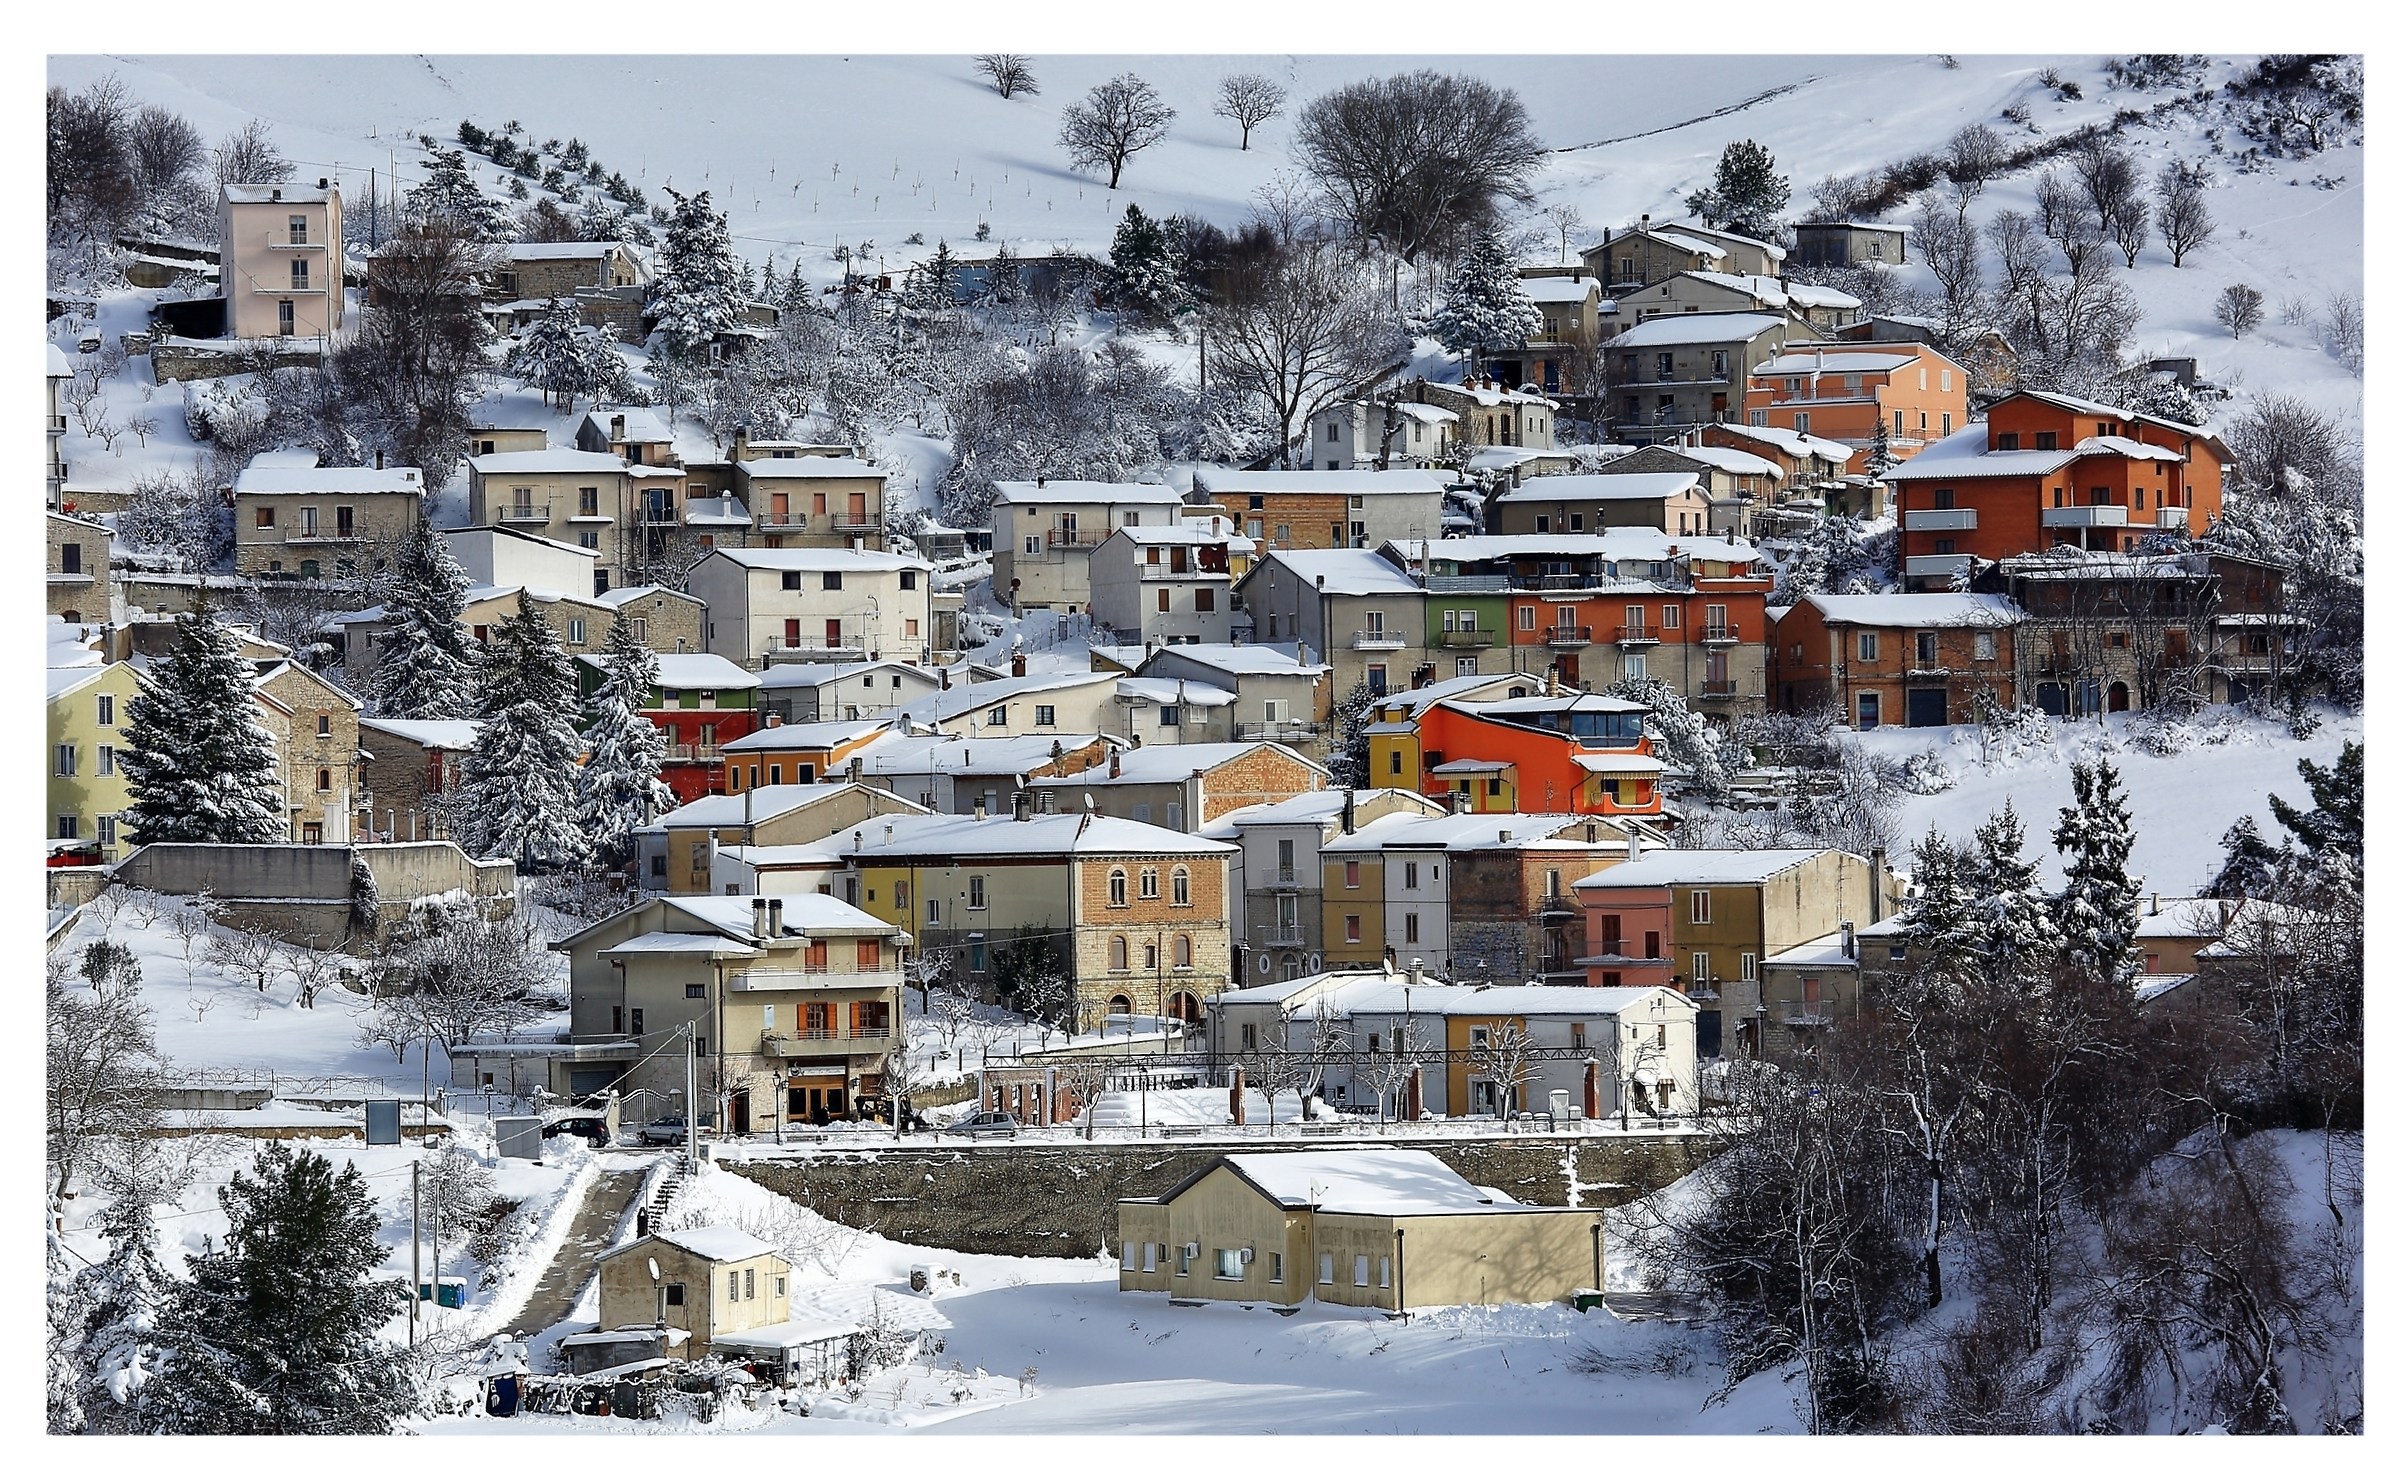 Postcard from Molise - first snowfall 2016...